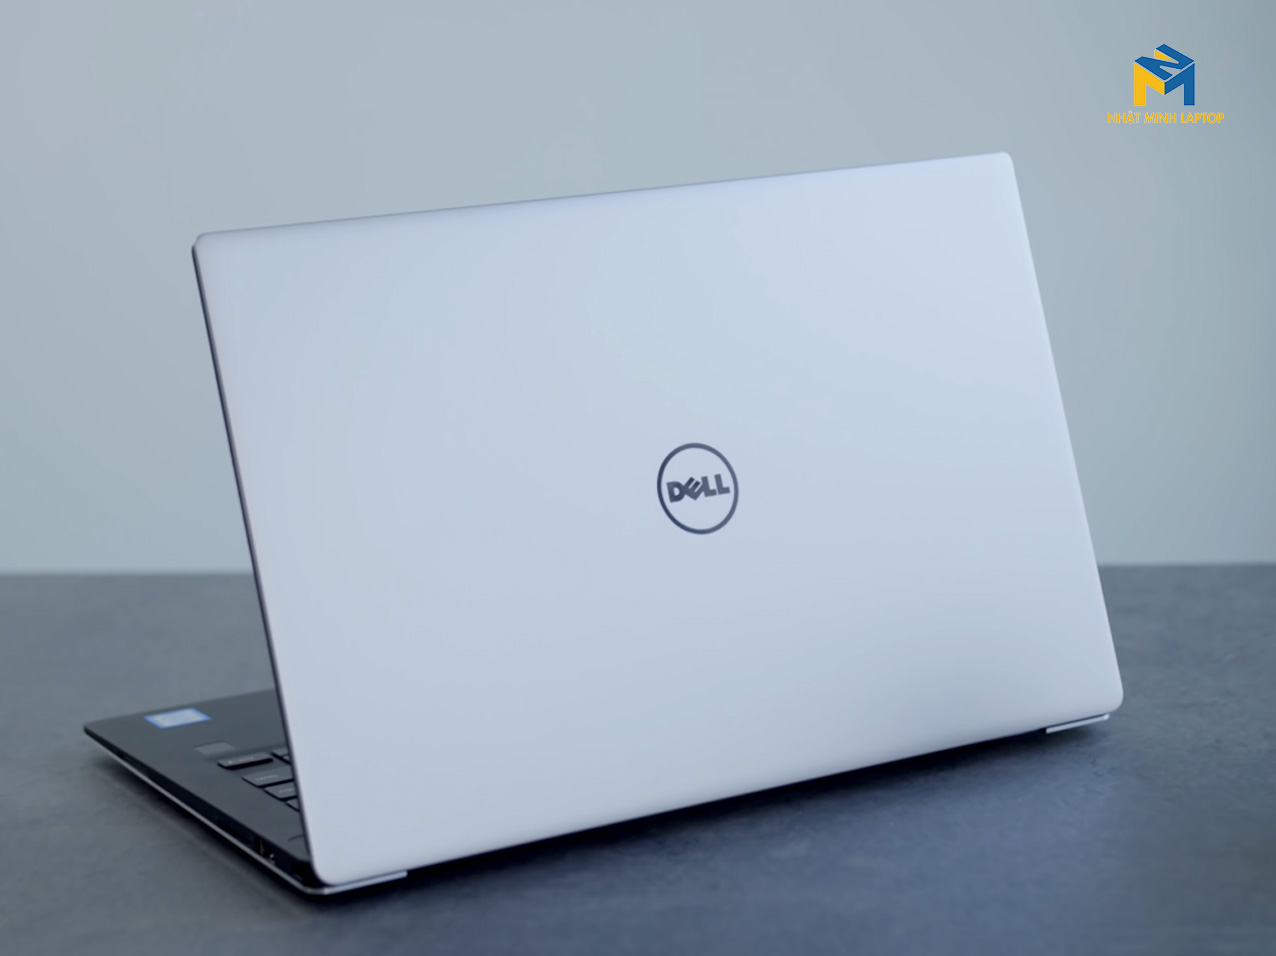 Dell XPS 13 9360 i7 - 7500U 16G SSD 512G 3K Touch Like New 99%